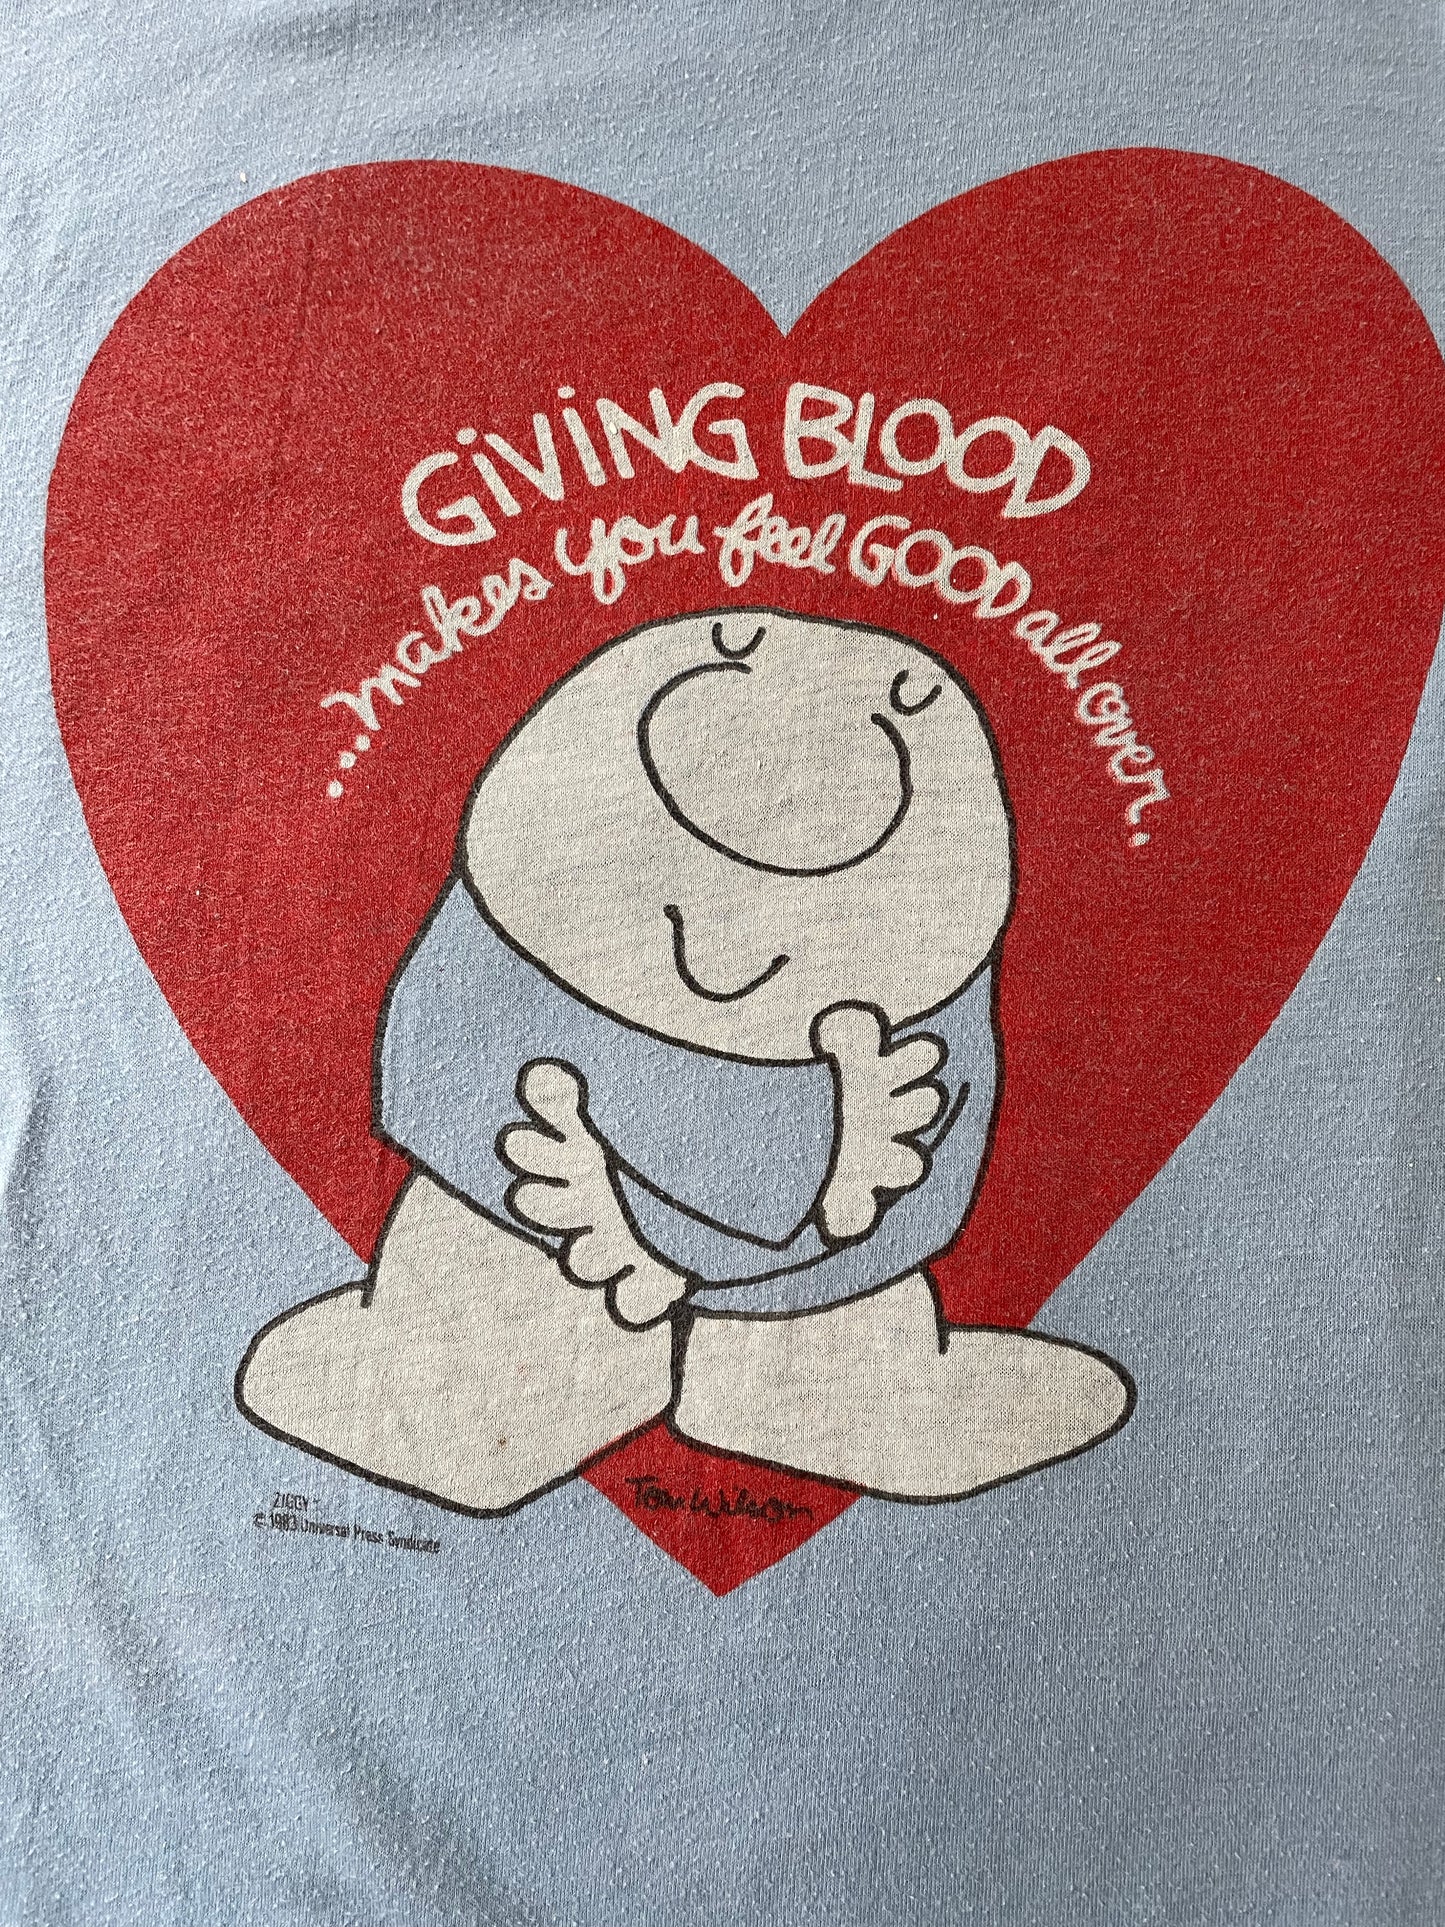 80s Ziggy “Giving Blood … Makes You Feel Good All Over” Tee